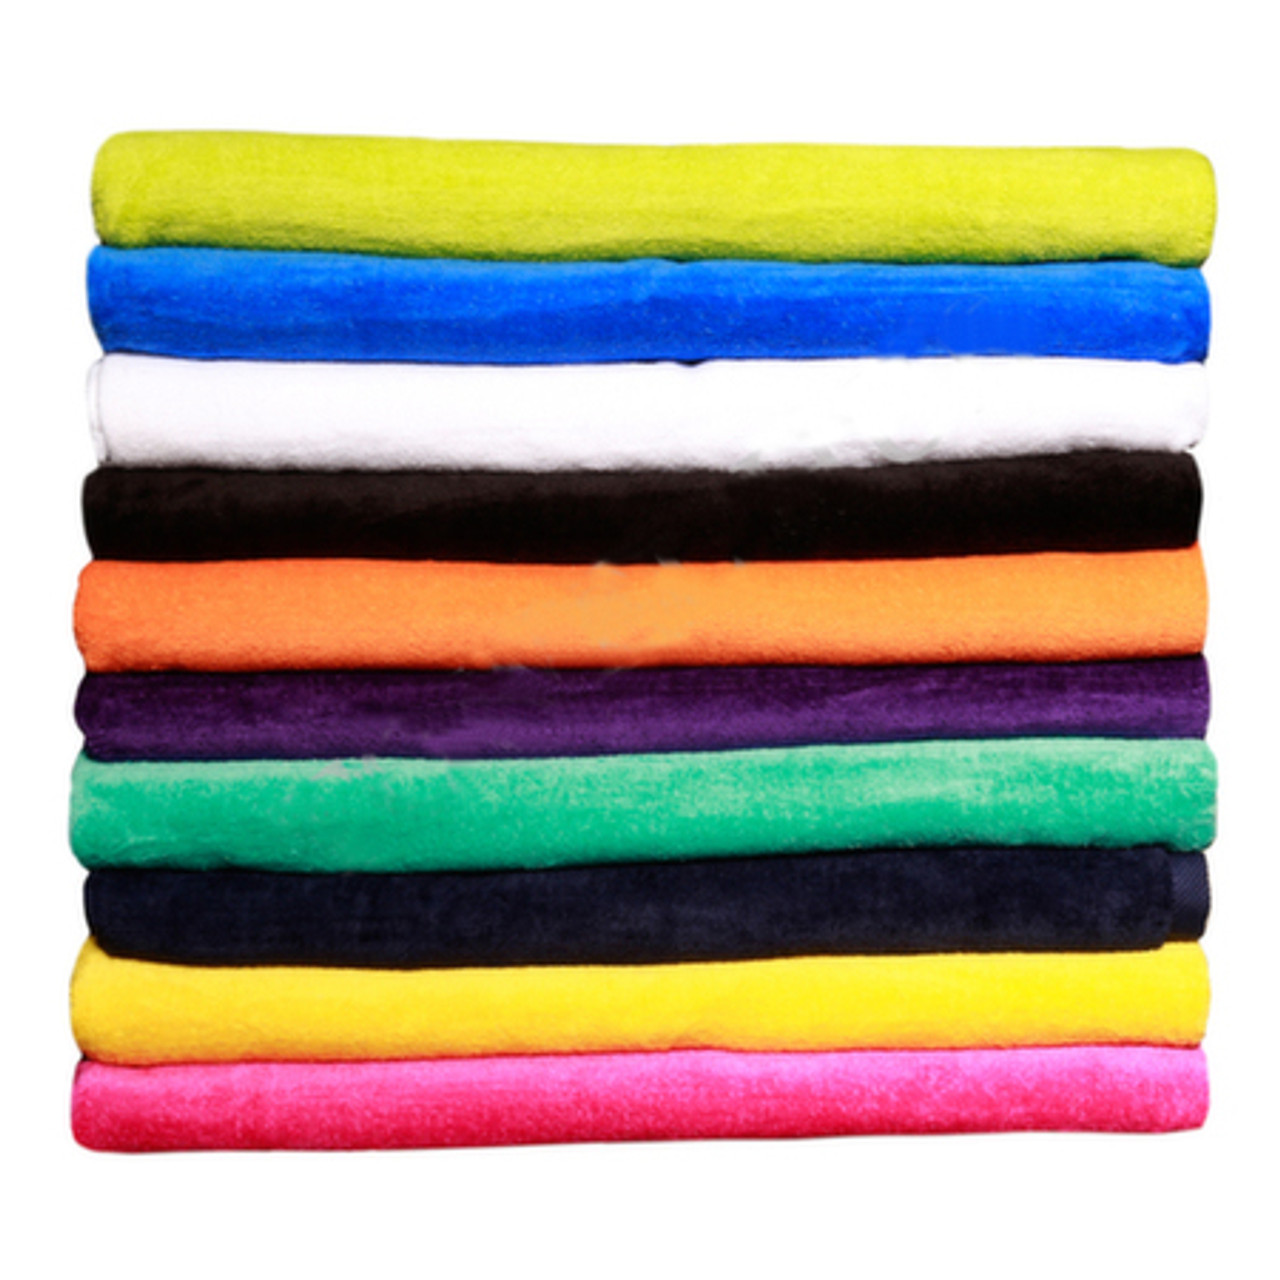 12 Pieces Microfiber Cloths,Super Abosorbent Cleaning Rags for  Home,Kitchen,Auto,Bathroom,Hotel(Multiplie Color Assorted)